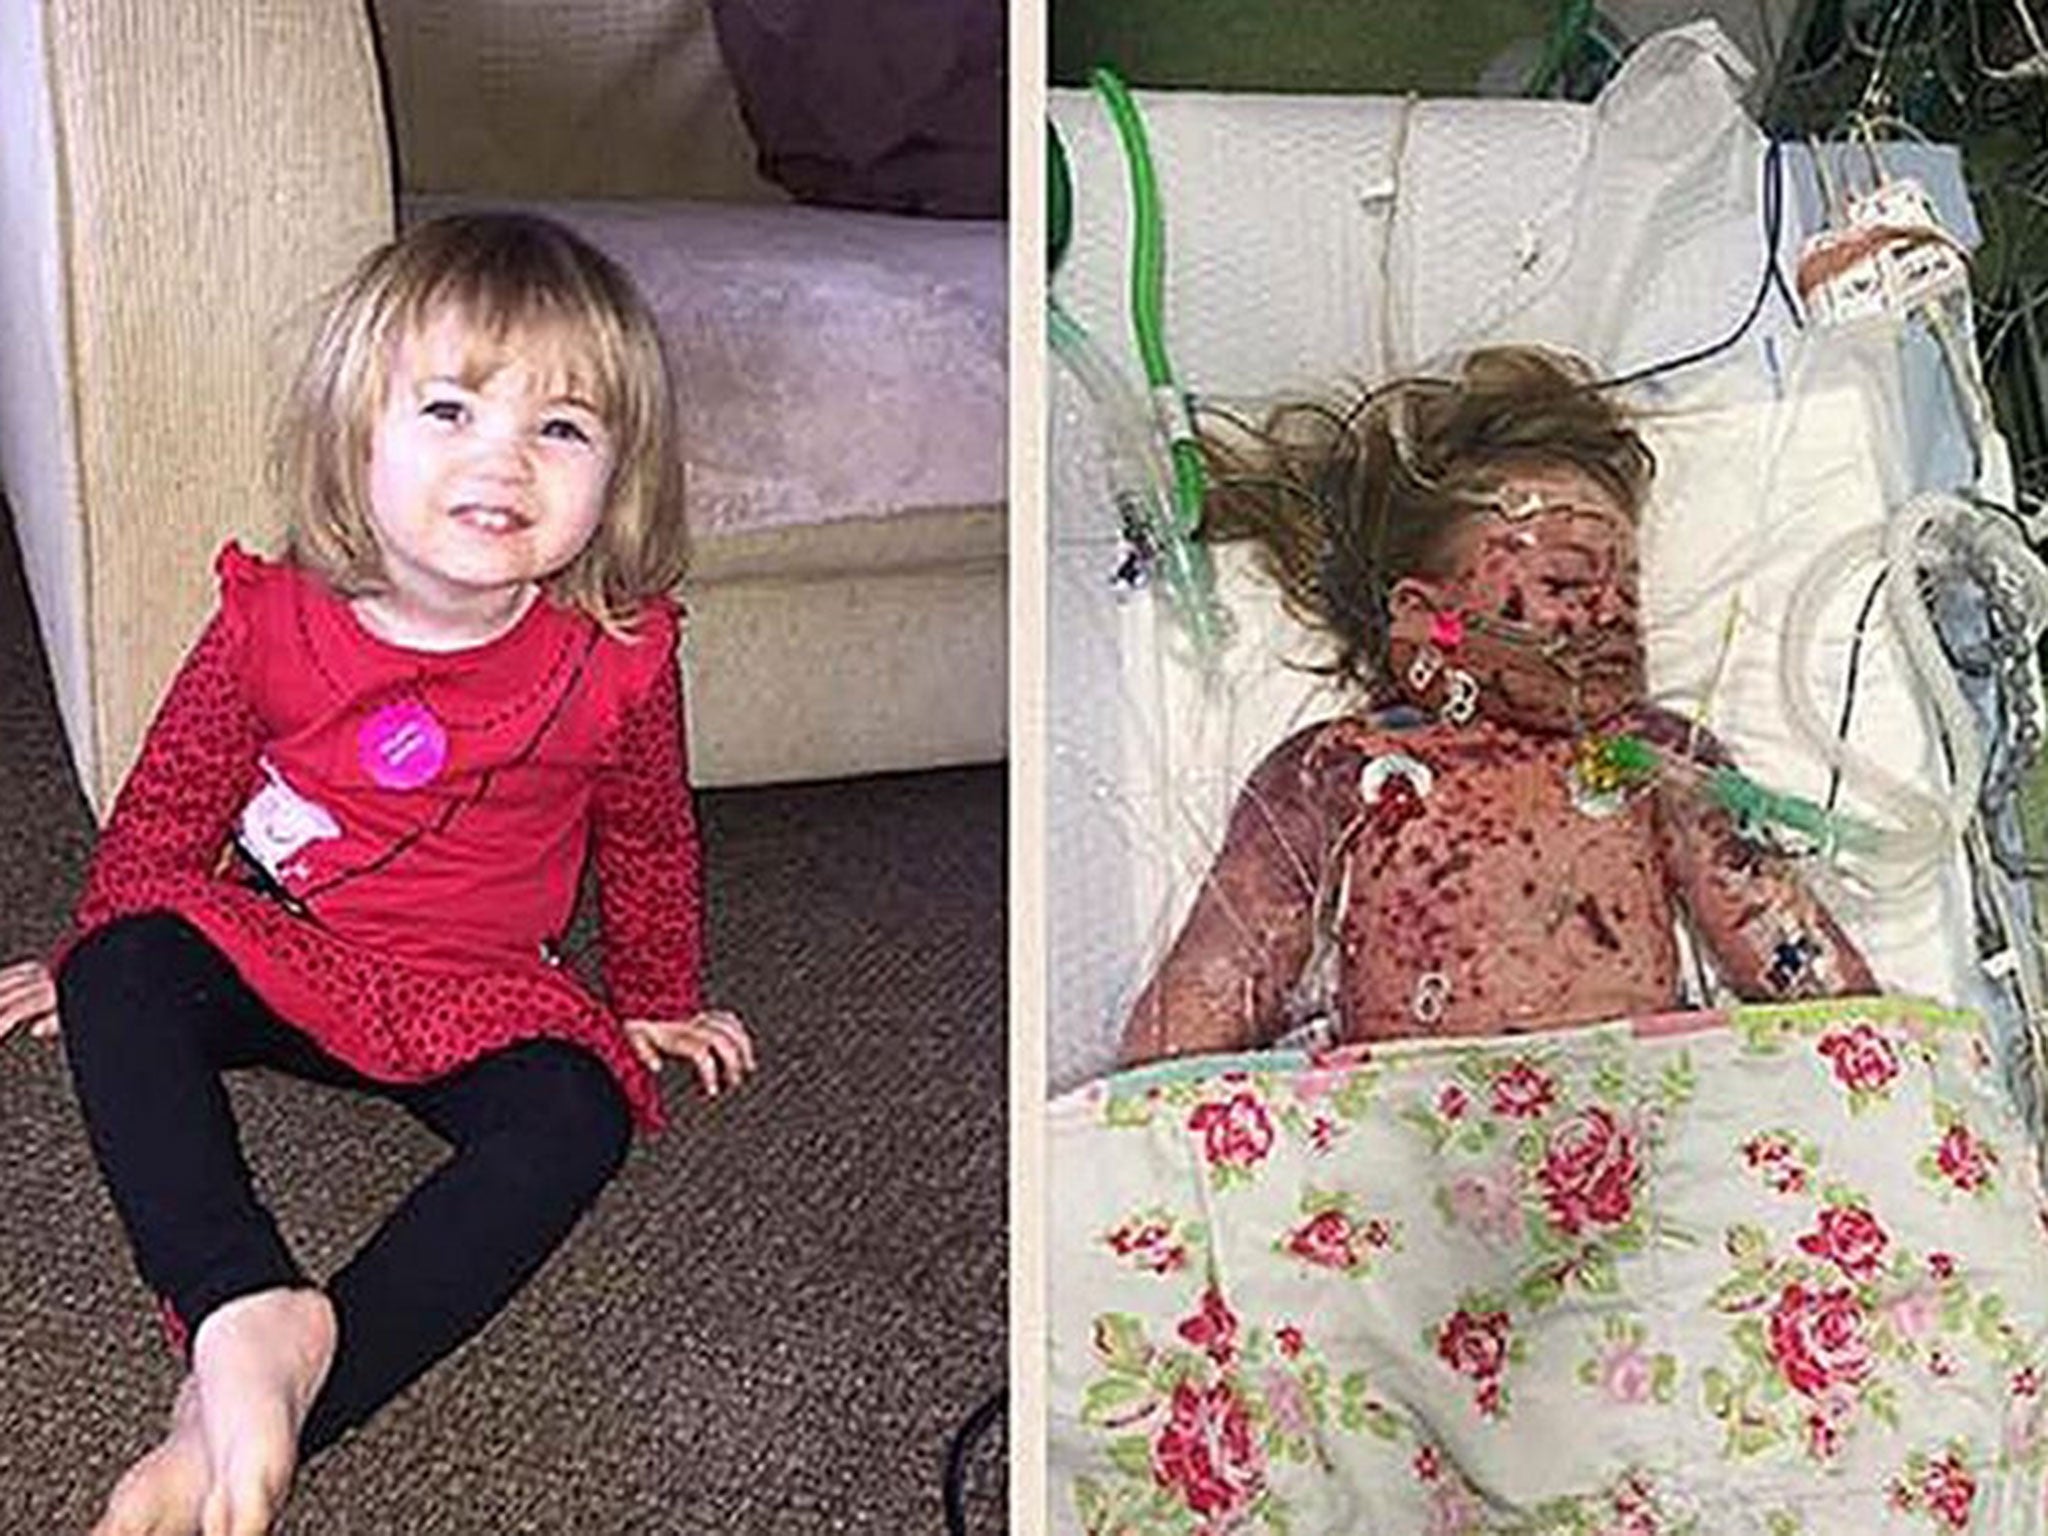 Faye Burdett before (left) and after she contracted meningitis, as almost 250,000 people have signed a petition calling for all children to be given a meningitis vaccine following the death of the two-year-old.